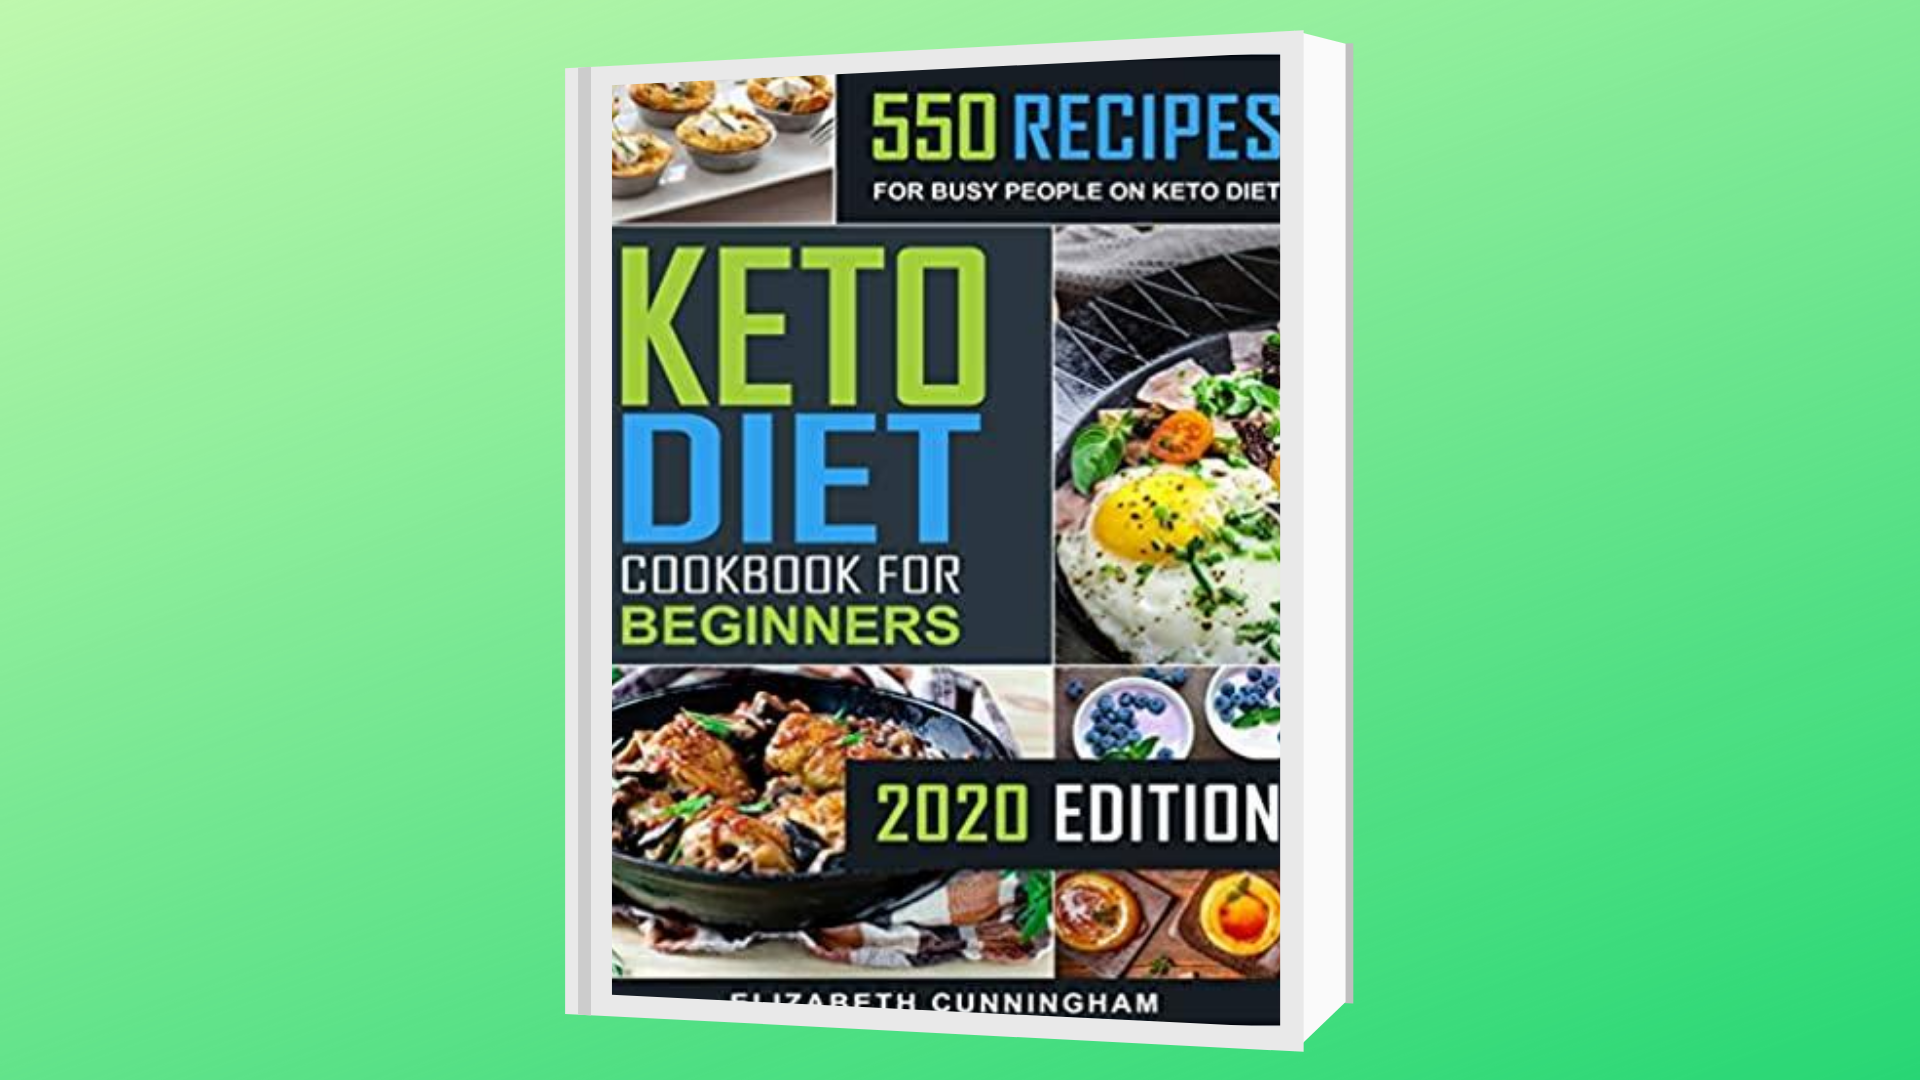 7 Best Keto Cookbooks For Weight Loss in 2022 and Beyond - First For Women